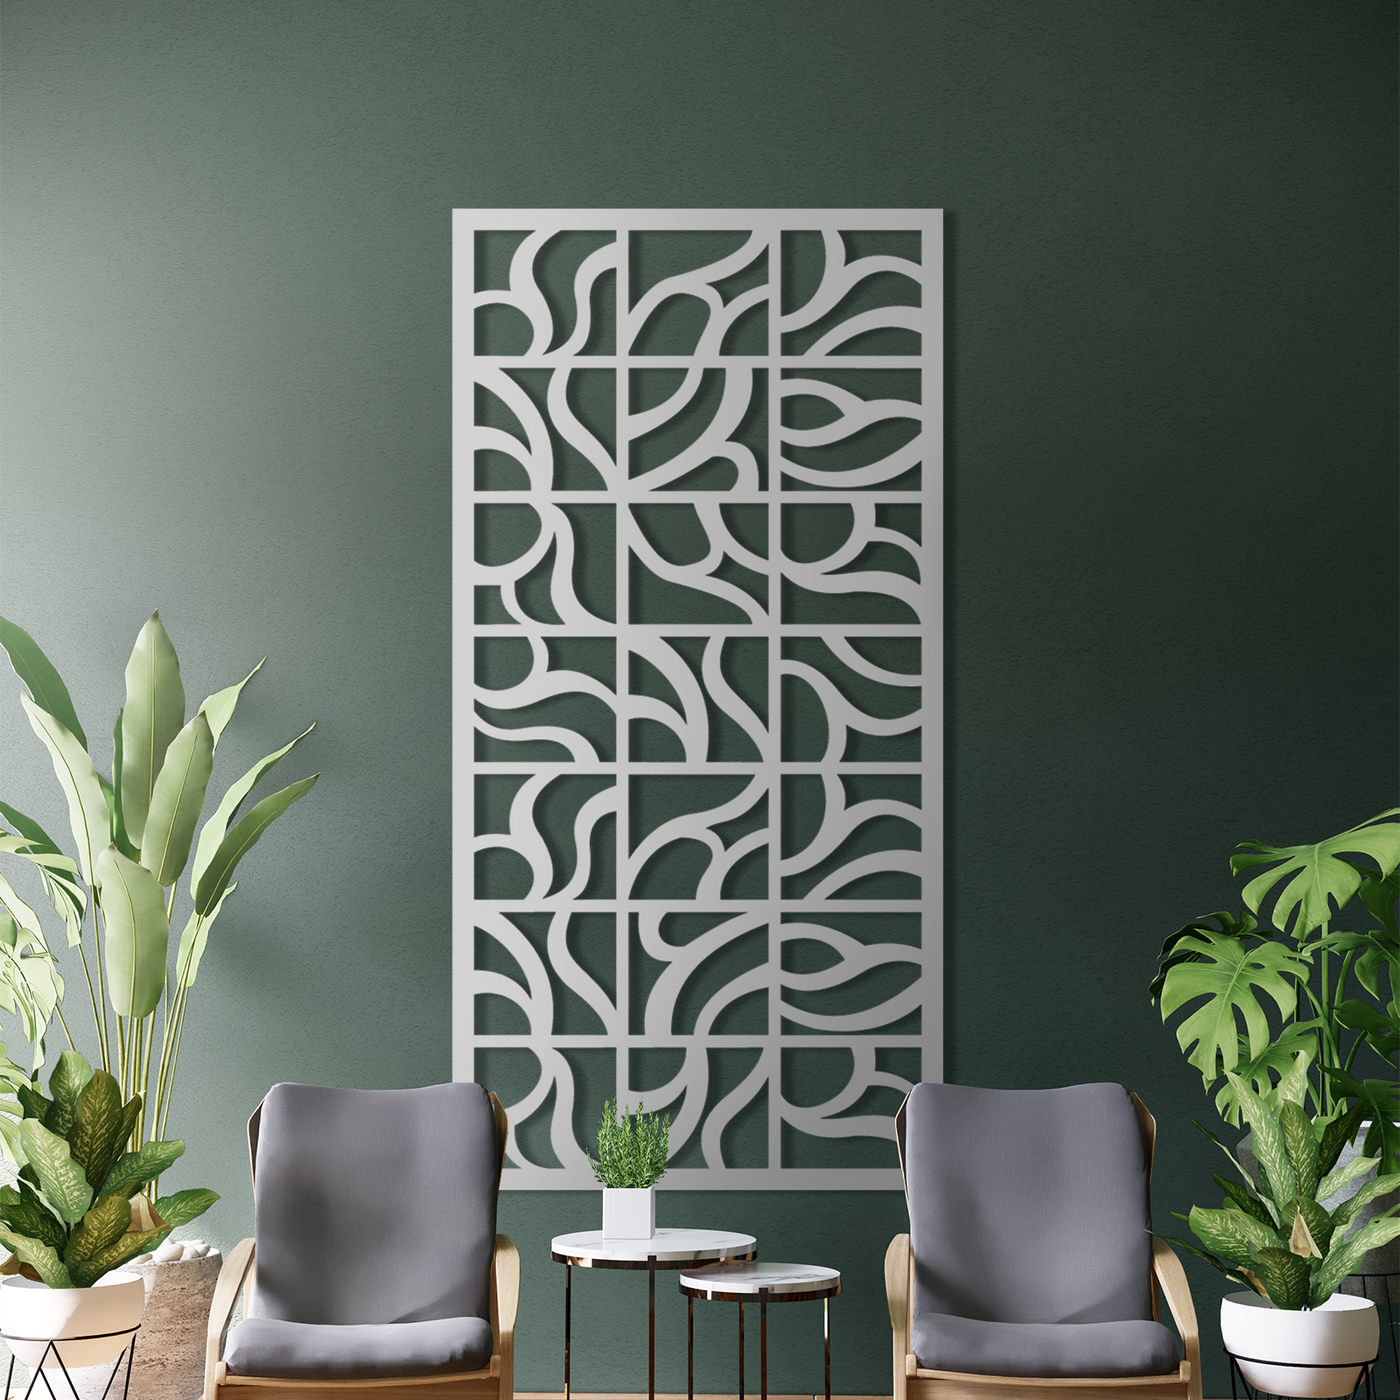 Wall Art Metal Screen: Add a Touch of Style to Your Garden